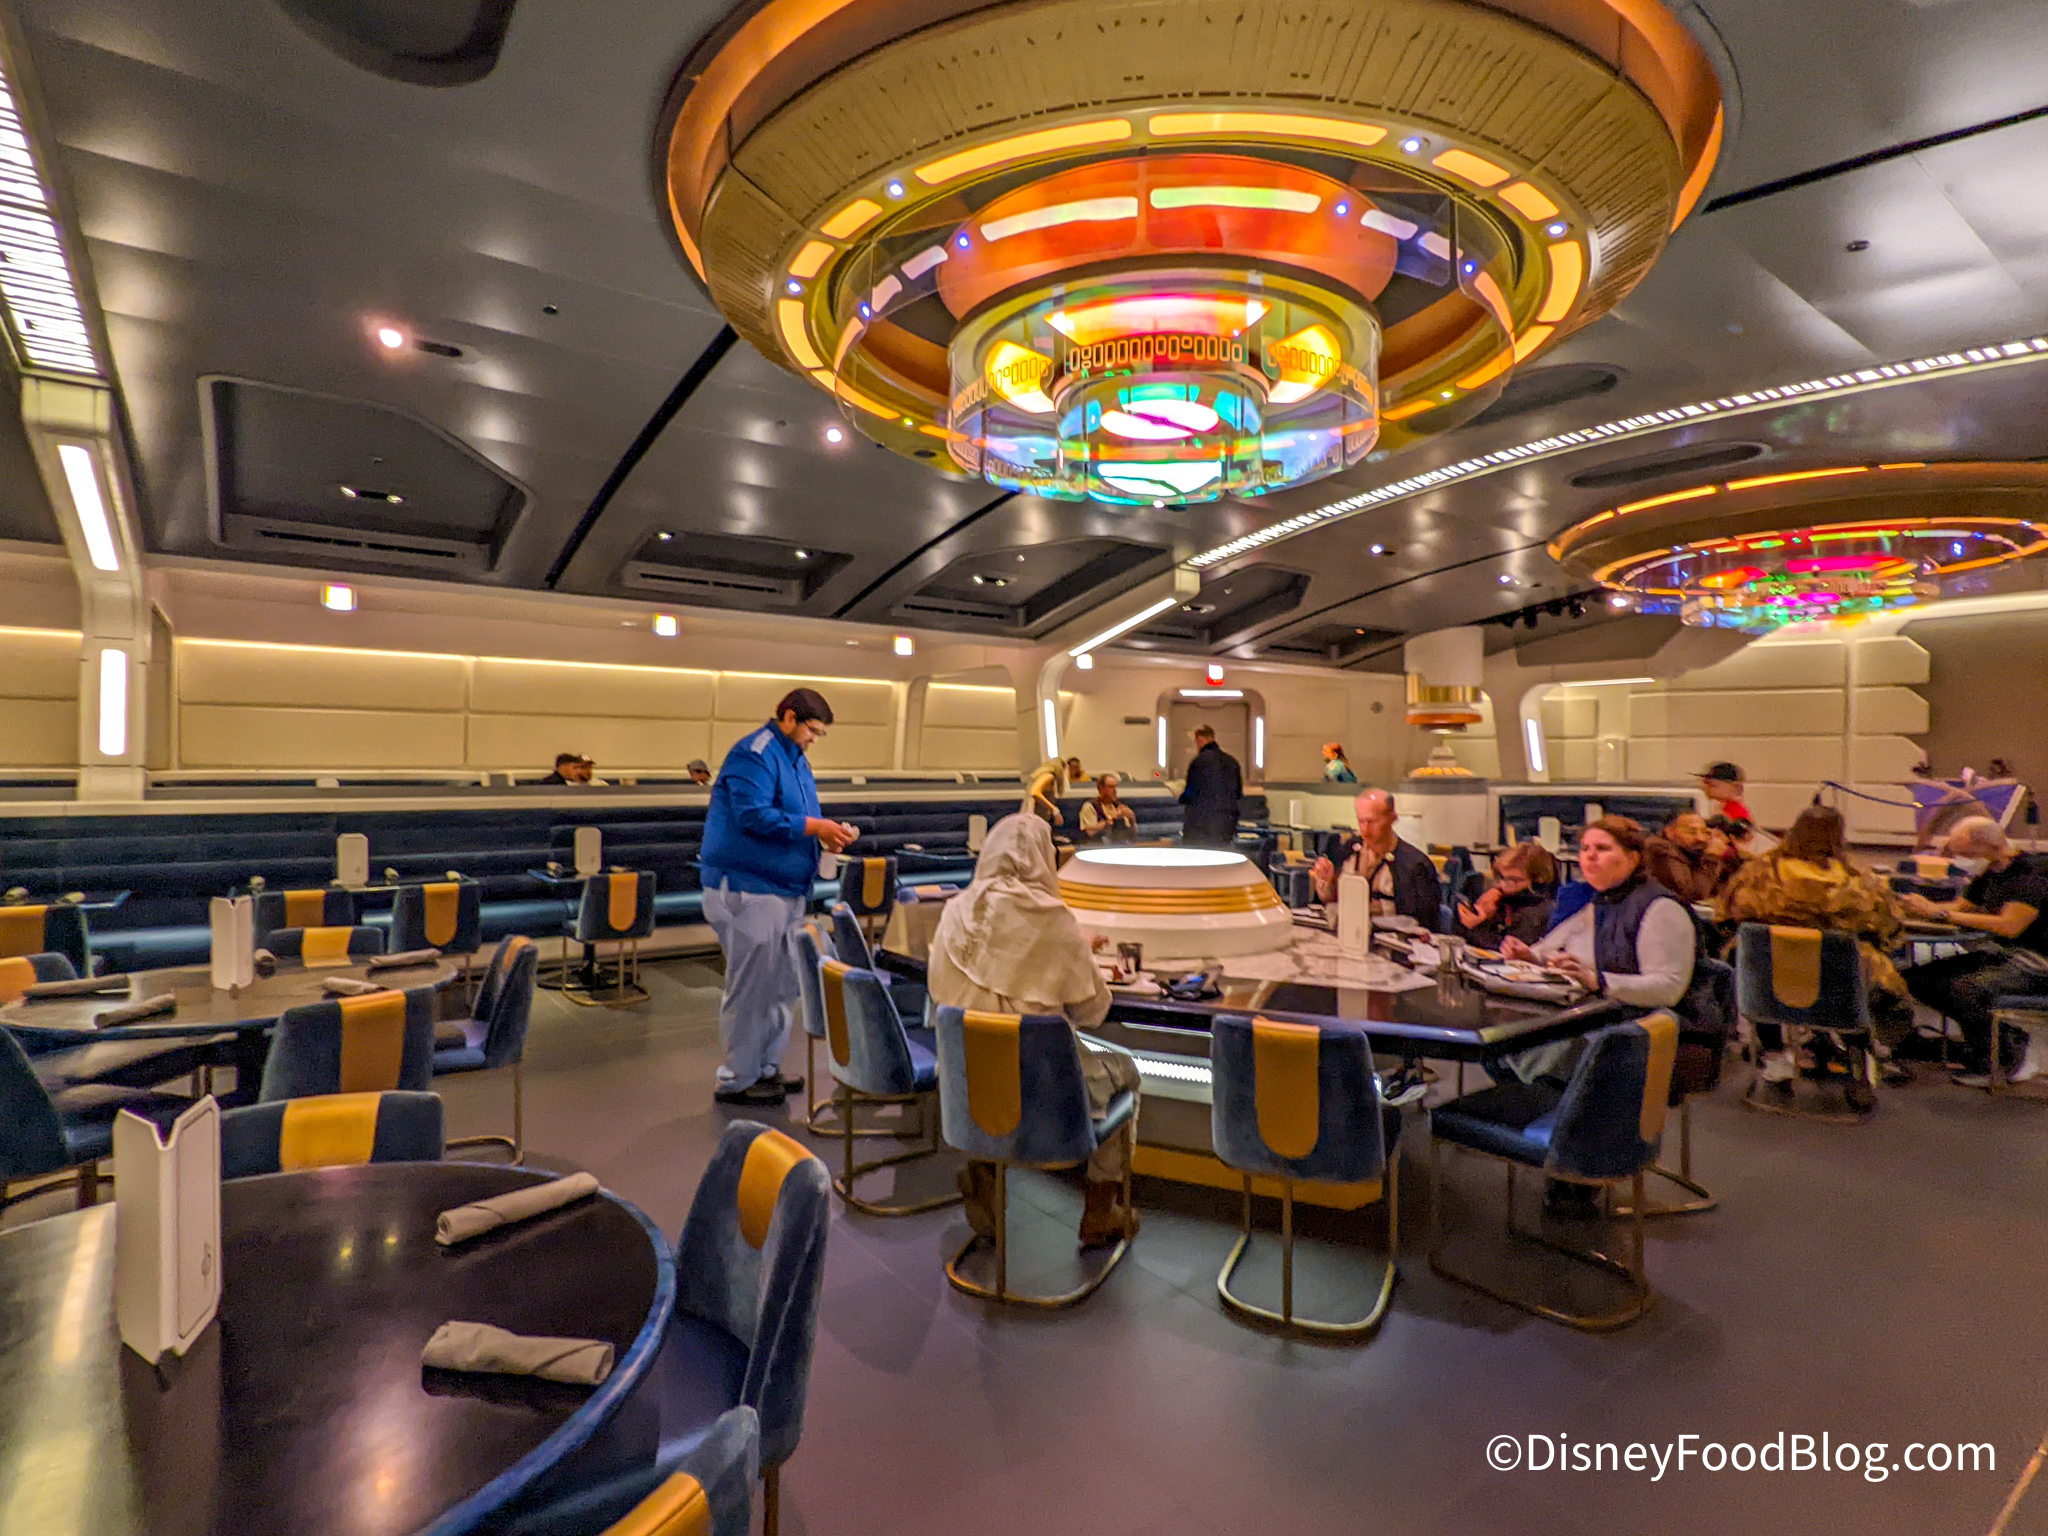 2022-wdw-star-wars-hotel-galactic-starcruiser-media-preview-crown-of-corellia-dining-room-2.jpg